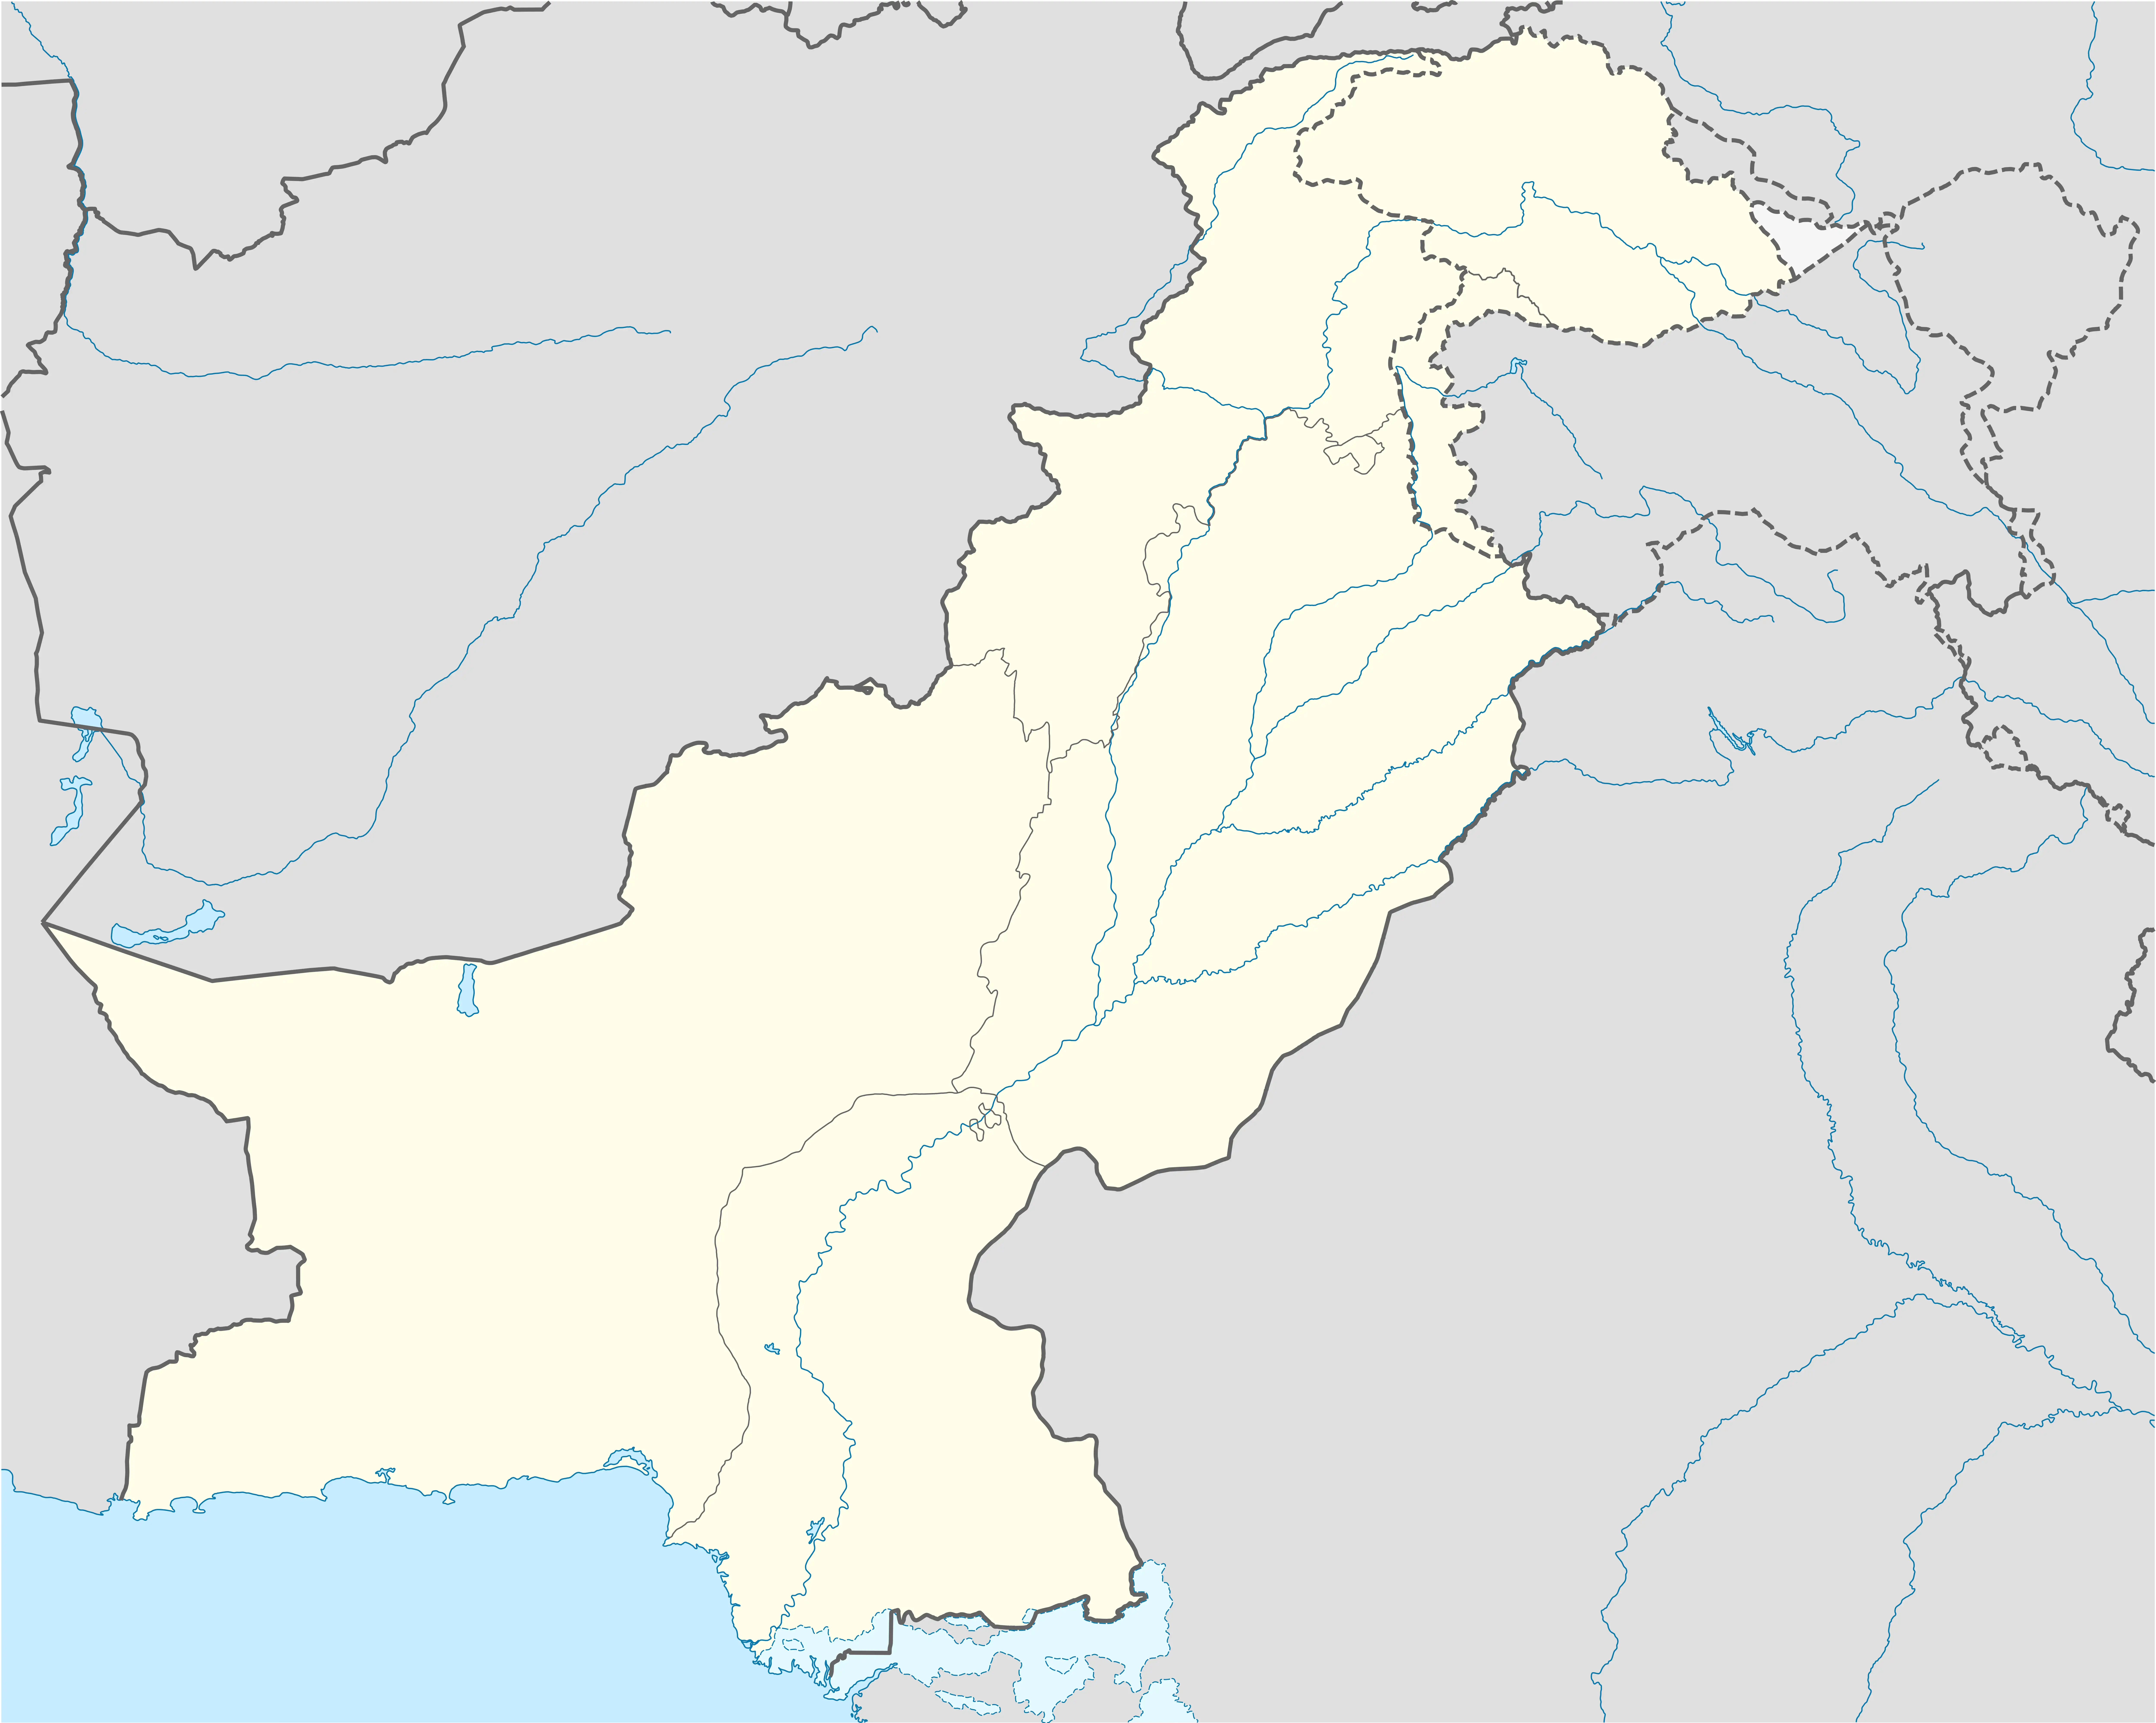 Nawabshah is located in Pakistan